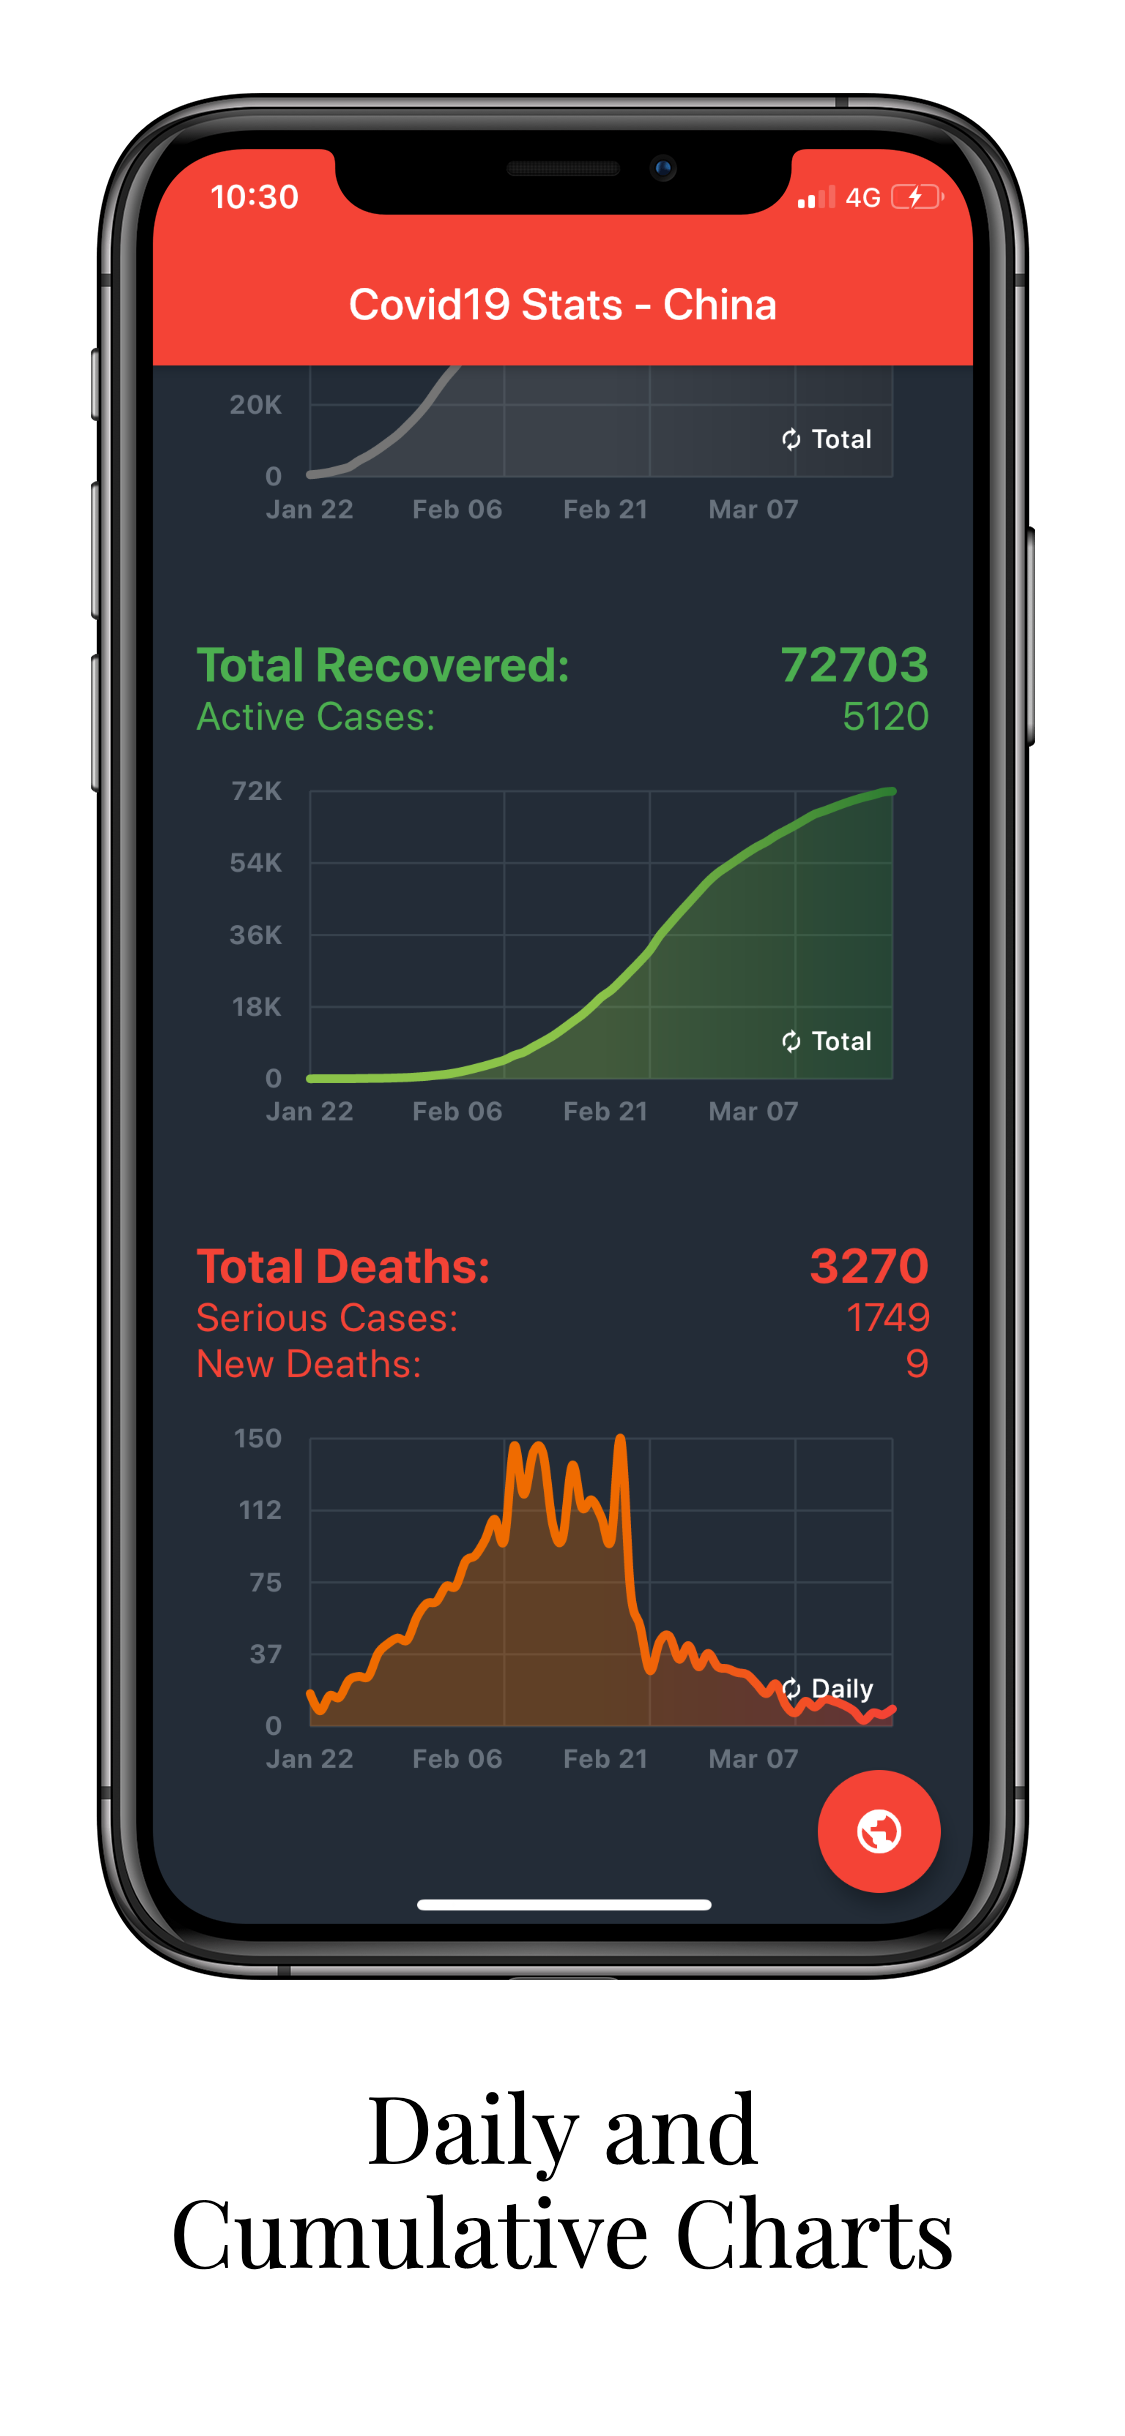 A simple mobile app developed with Flutter to visualize Covid-19 statistics